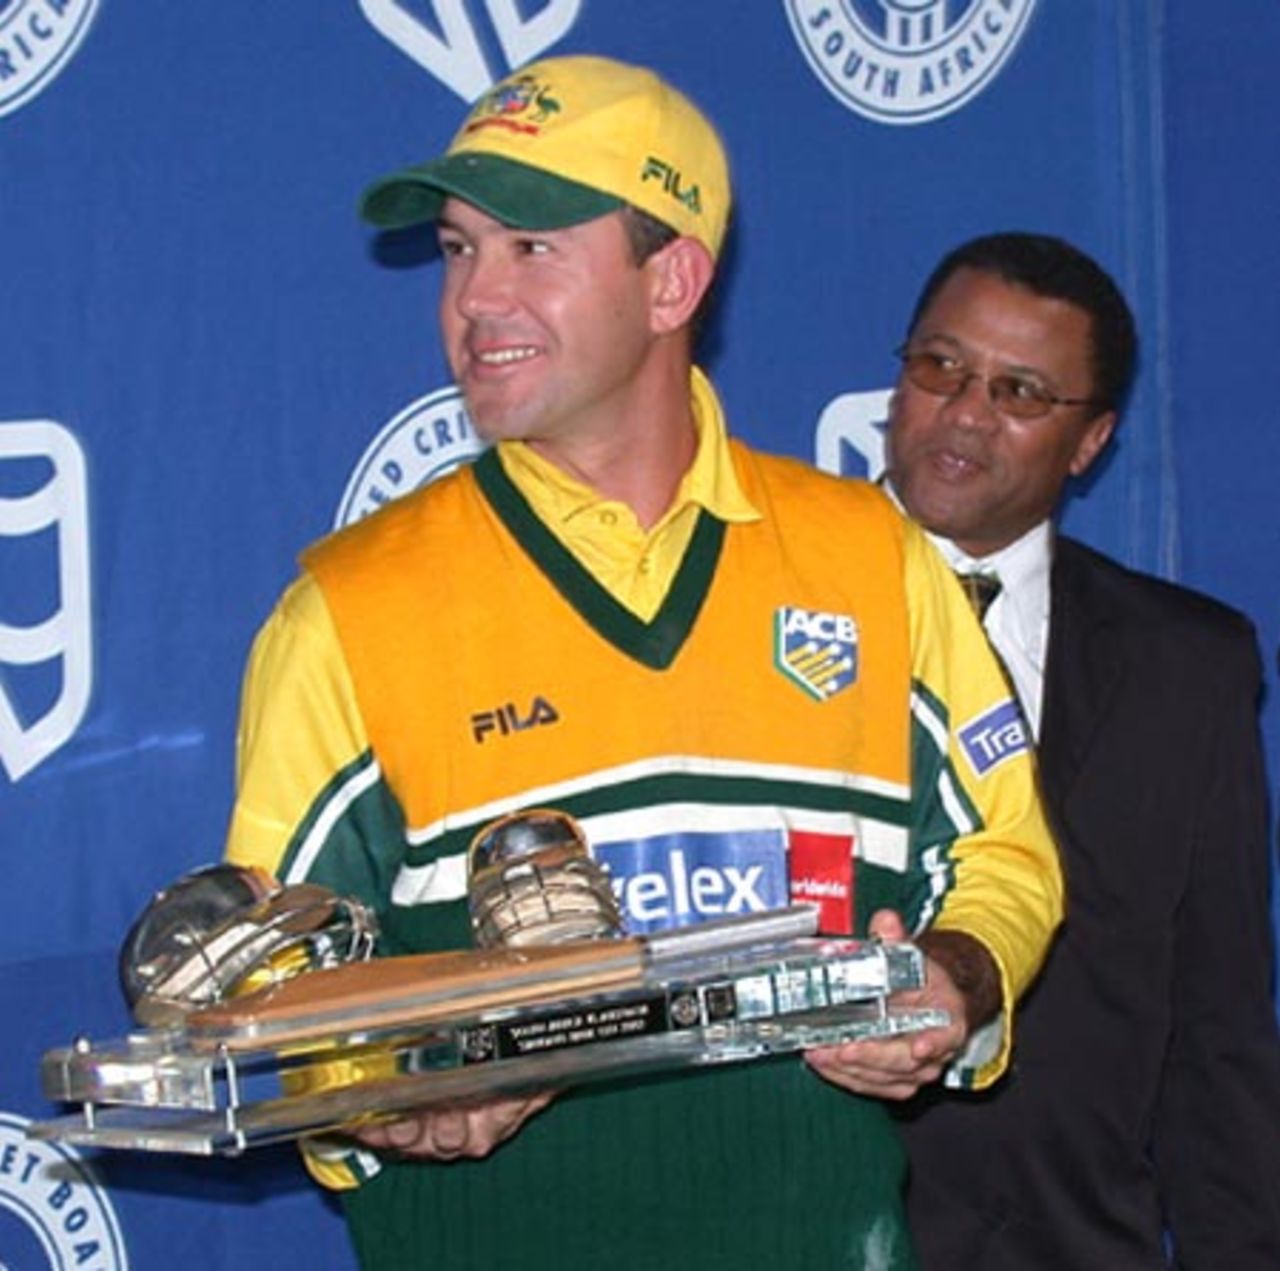 Australian captain Ricky Ponting with the Standard Bank Kings of Cricket ODI trophy at Newlands